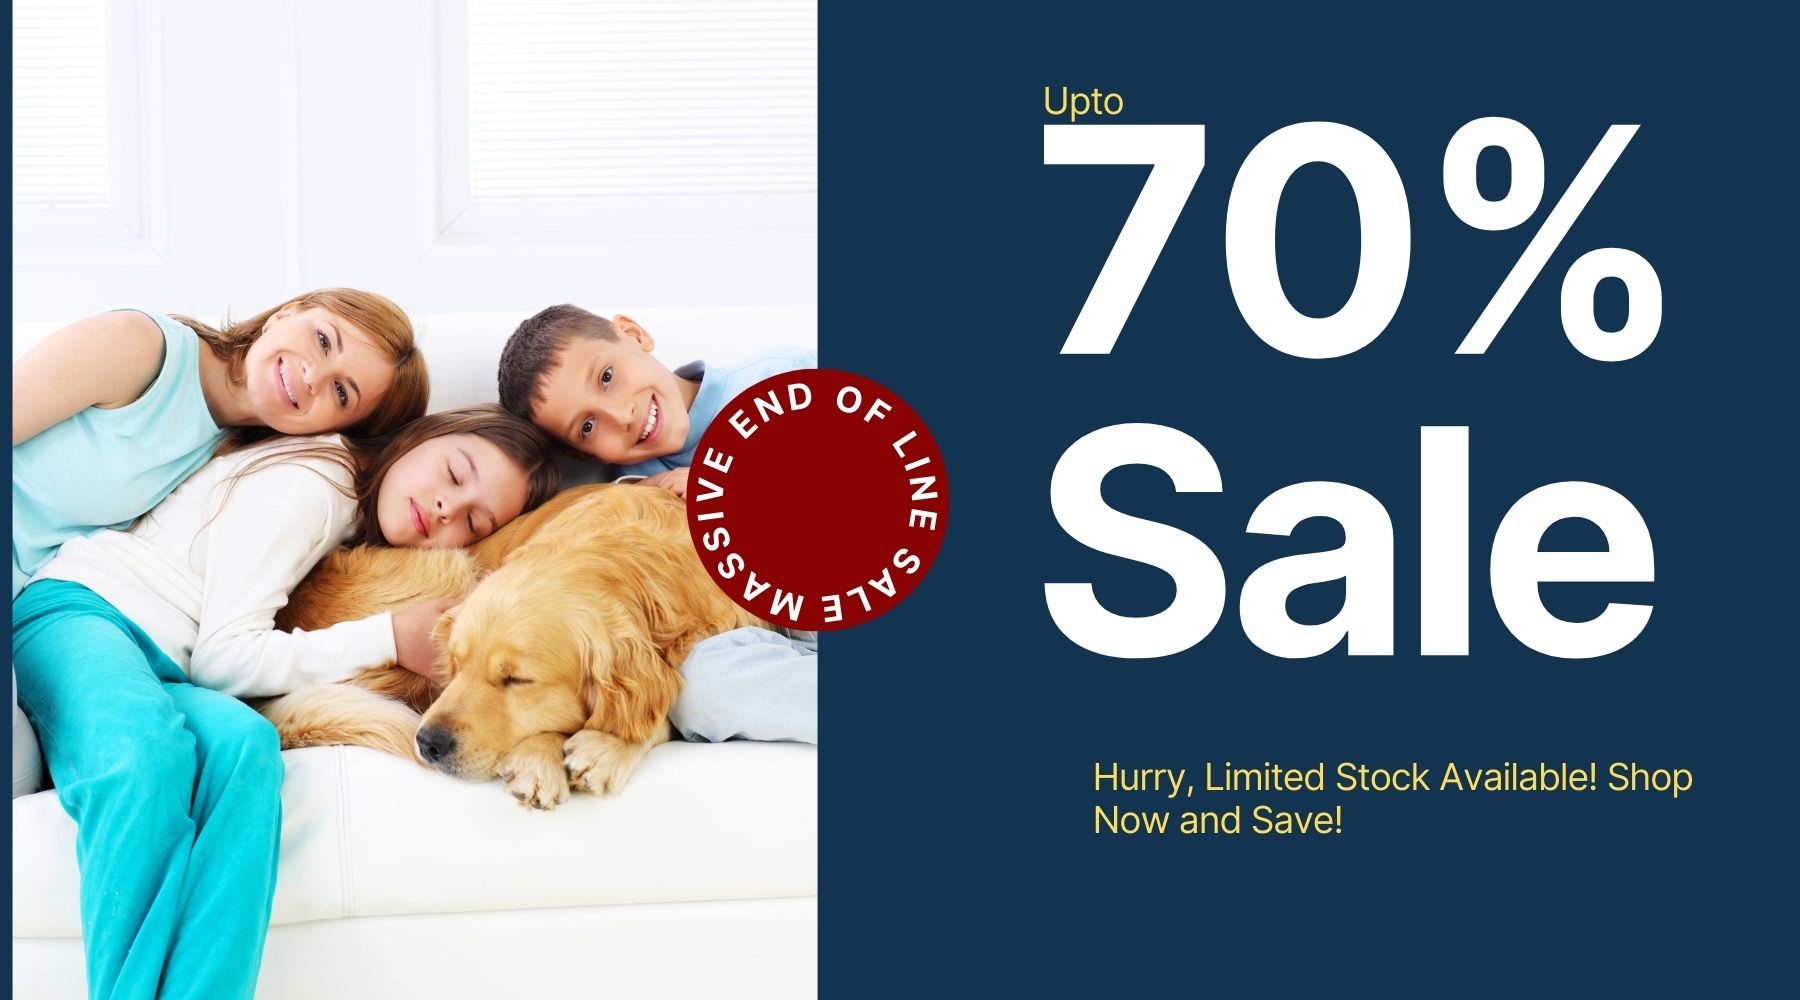 End of line sale at budget beds